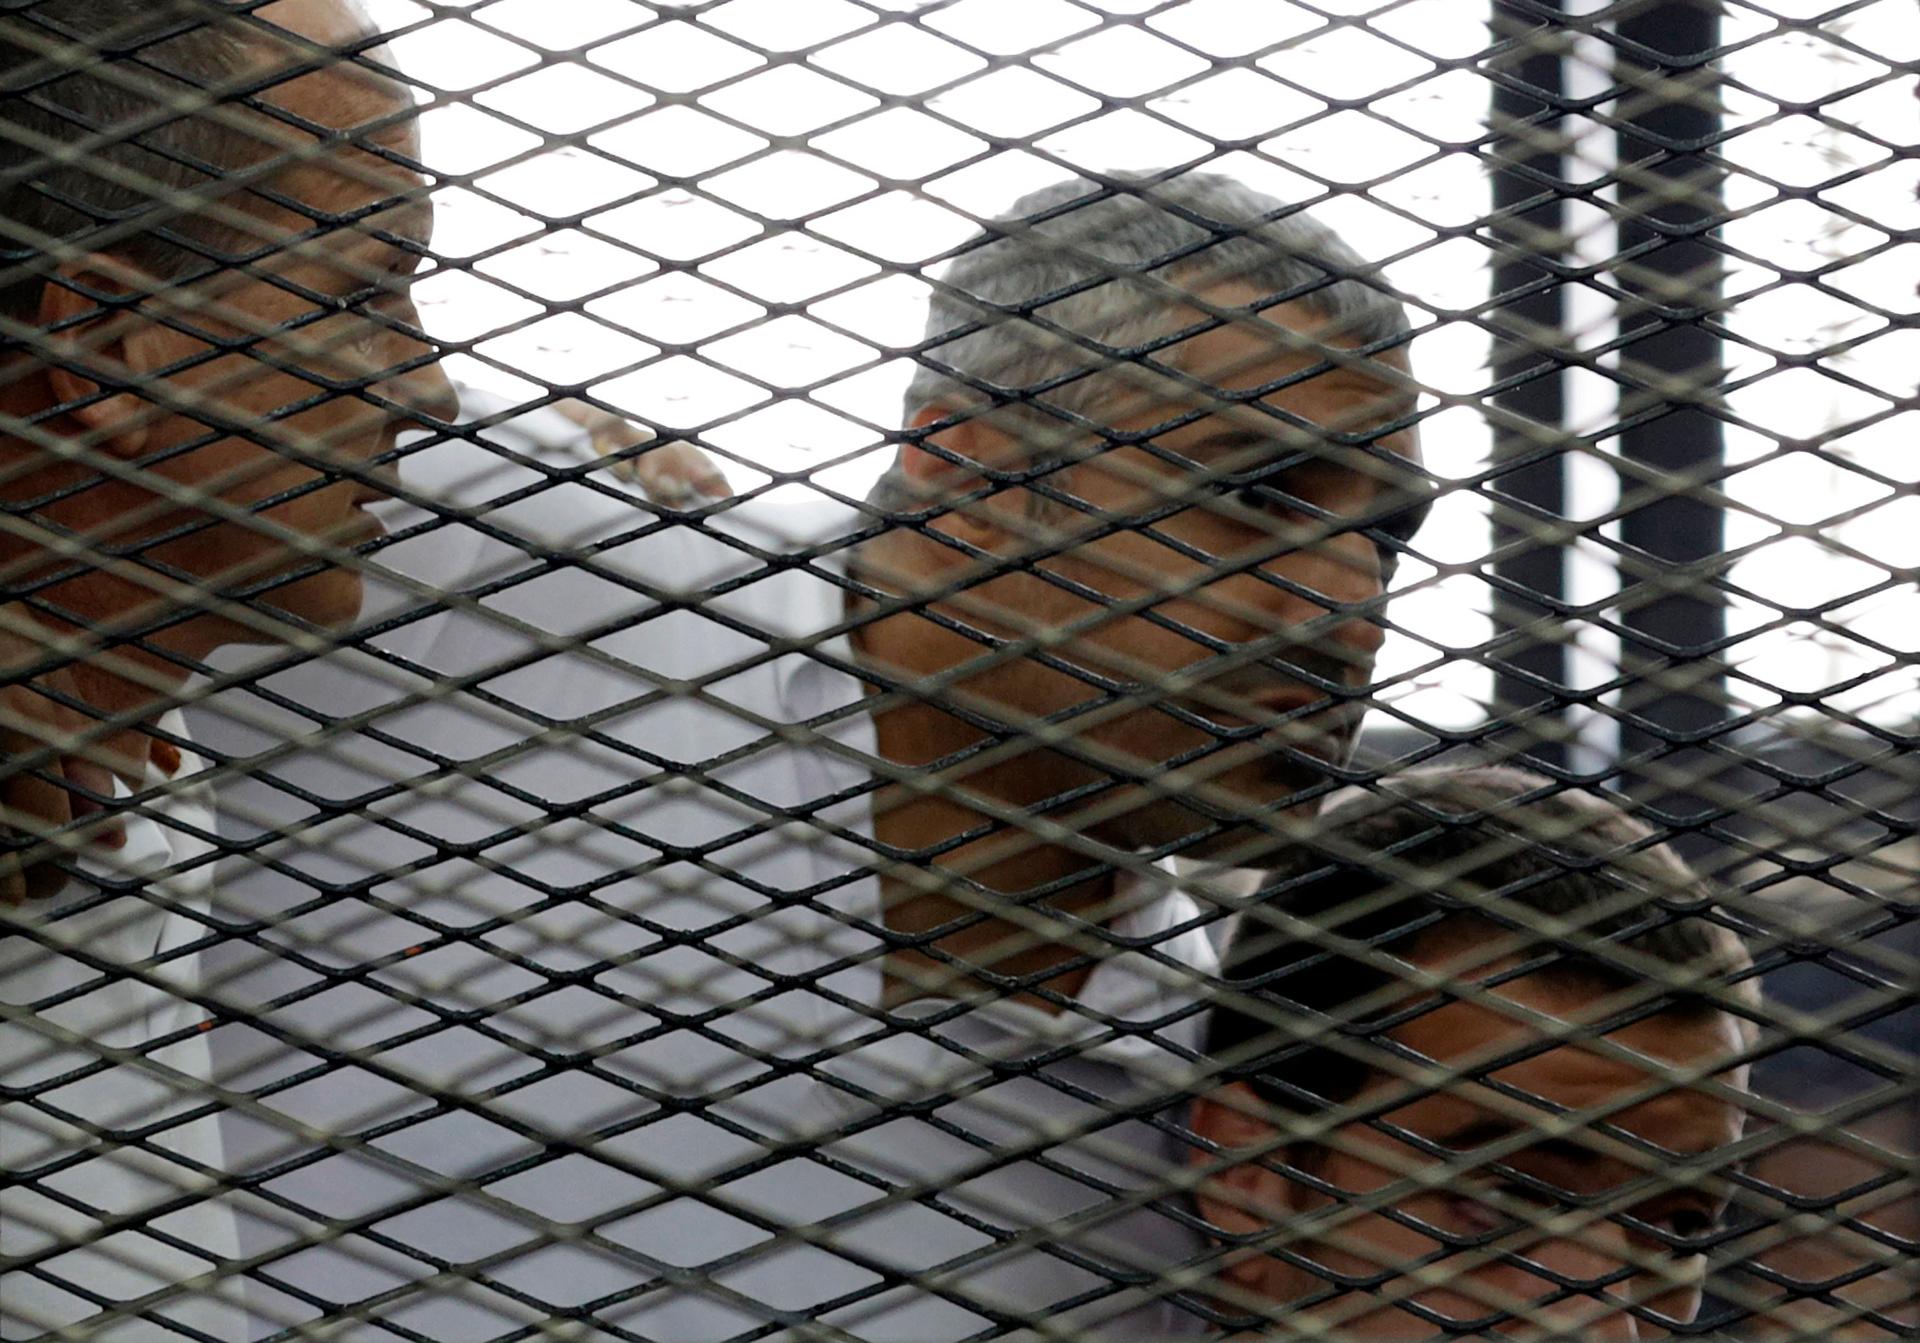 Peter Greste, Mohamed Fahmy and Baher Mohamed (L to R) listen to a ruling at a court in Cairo June 23, 2014. The three Al Jazeera journalists were jailed for seven years in Egypt on Monday after the court convicted them of helping a "terrorist organizatio